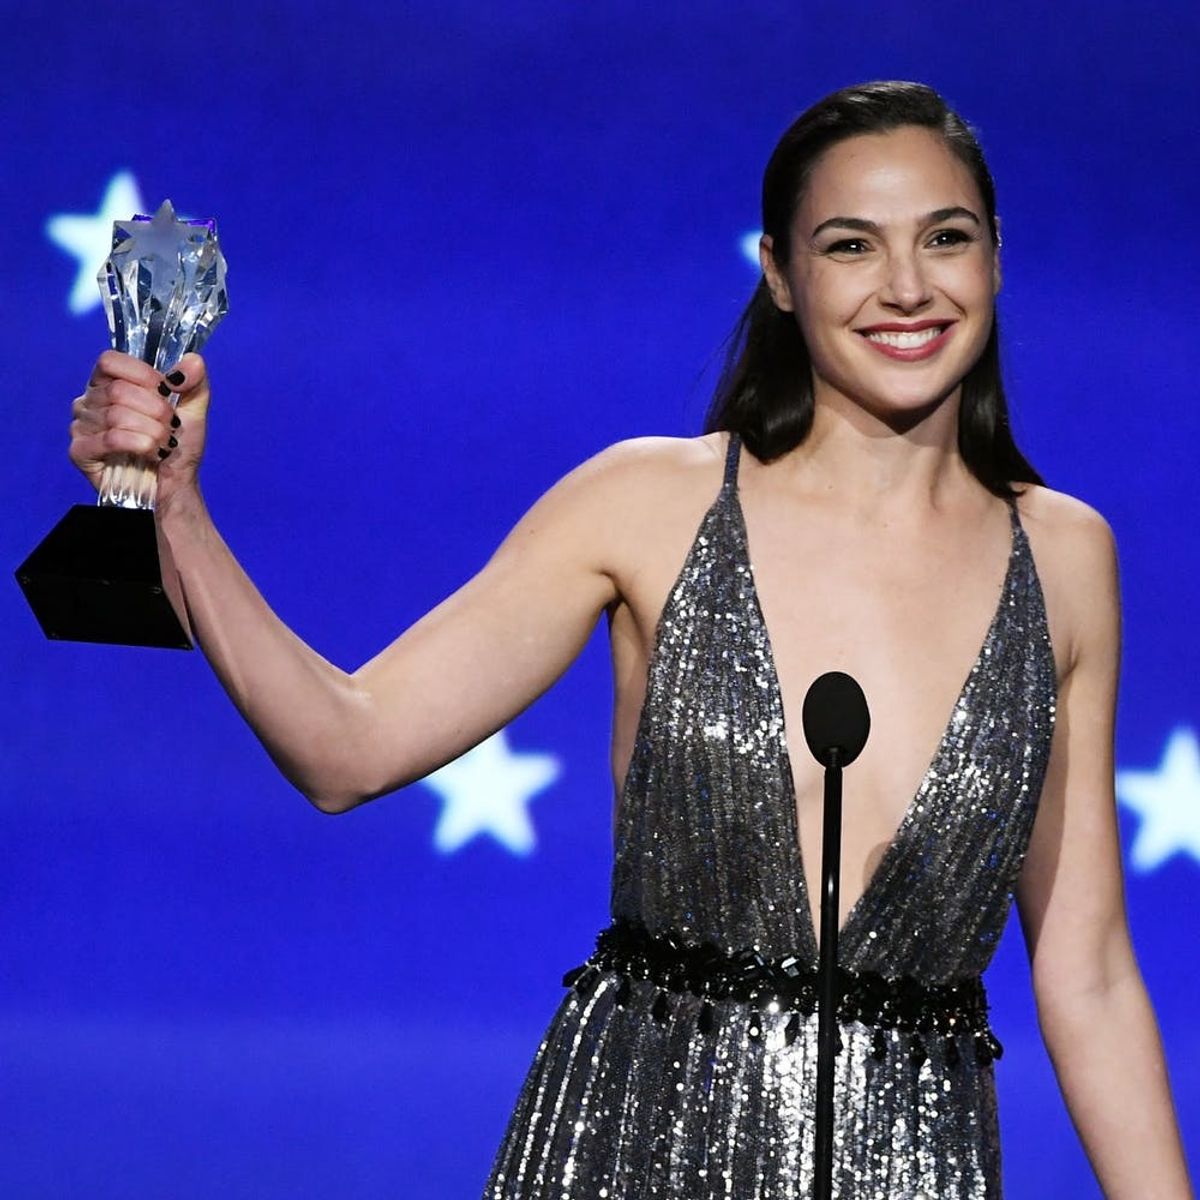 Gal Gadot Dedicates Critics’ Choice #SeeHer Award to ‘All the Women and Men Who Stand for What’s Right’